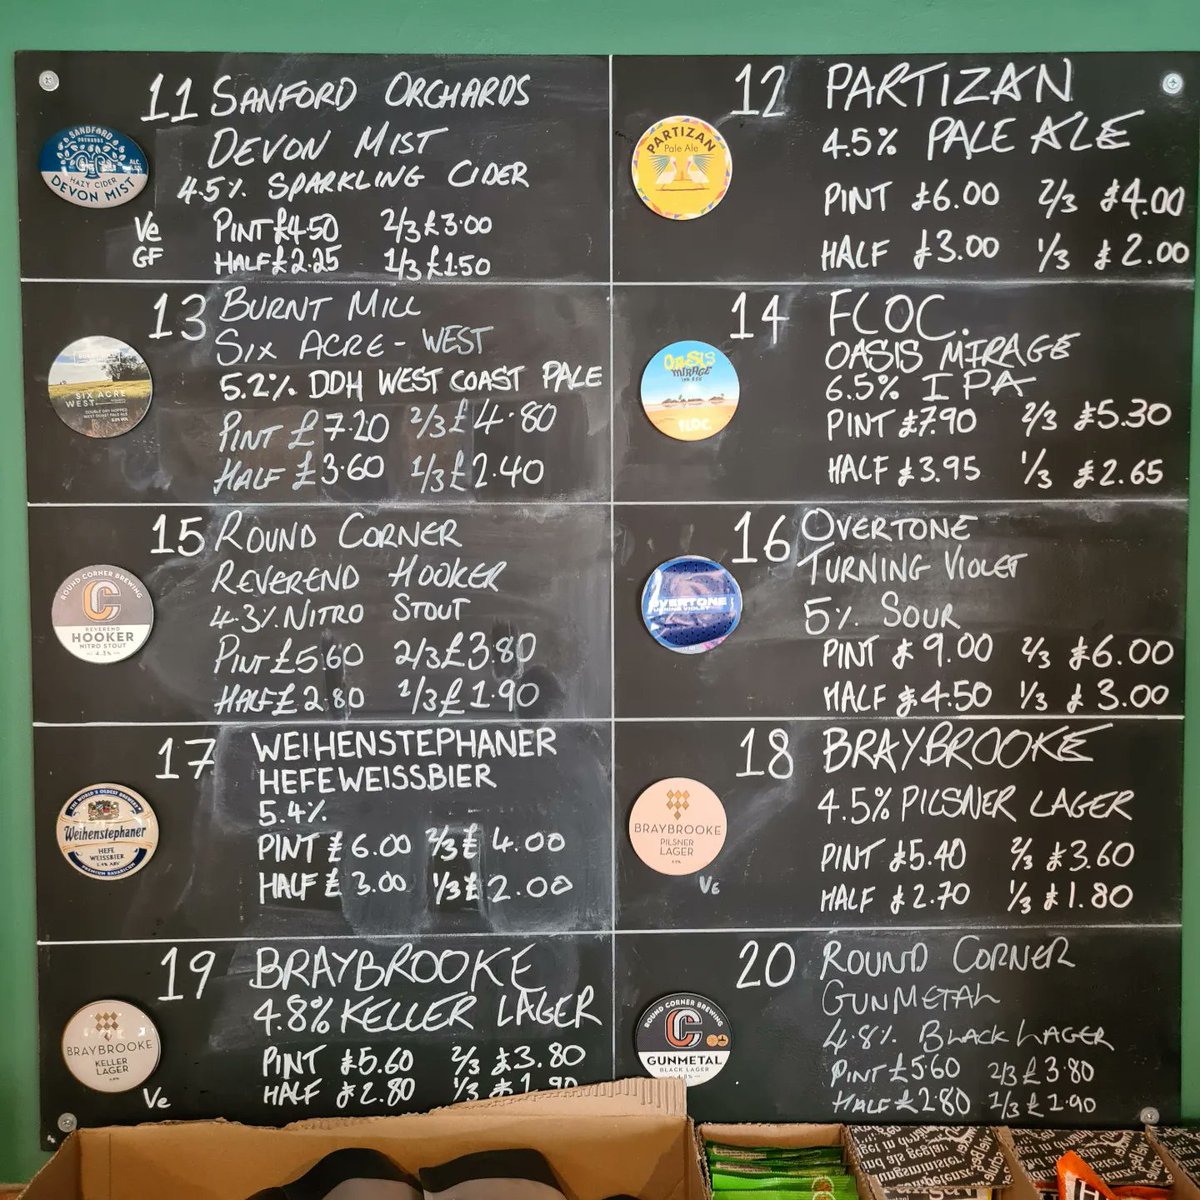 We have plenty of fantastic beers pouring for you to enjoy if you're stopping by today. 

#fridaybeerboard #greatbeer #camra #marketharborough